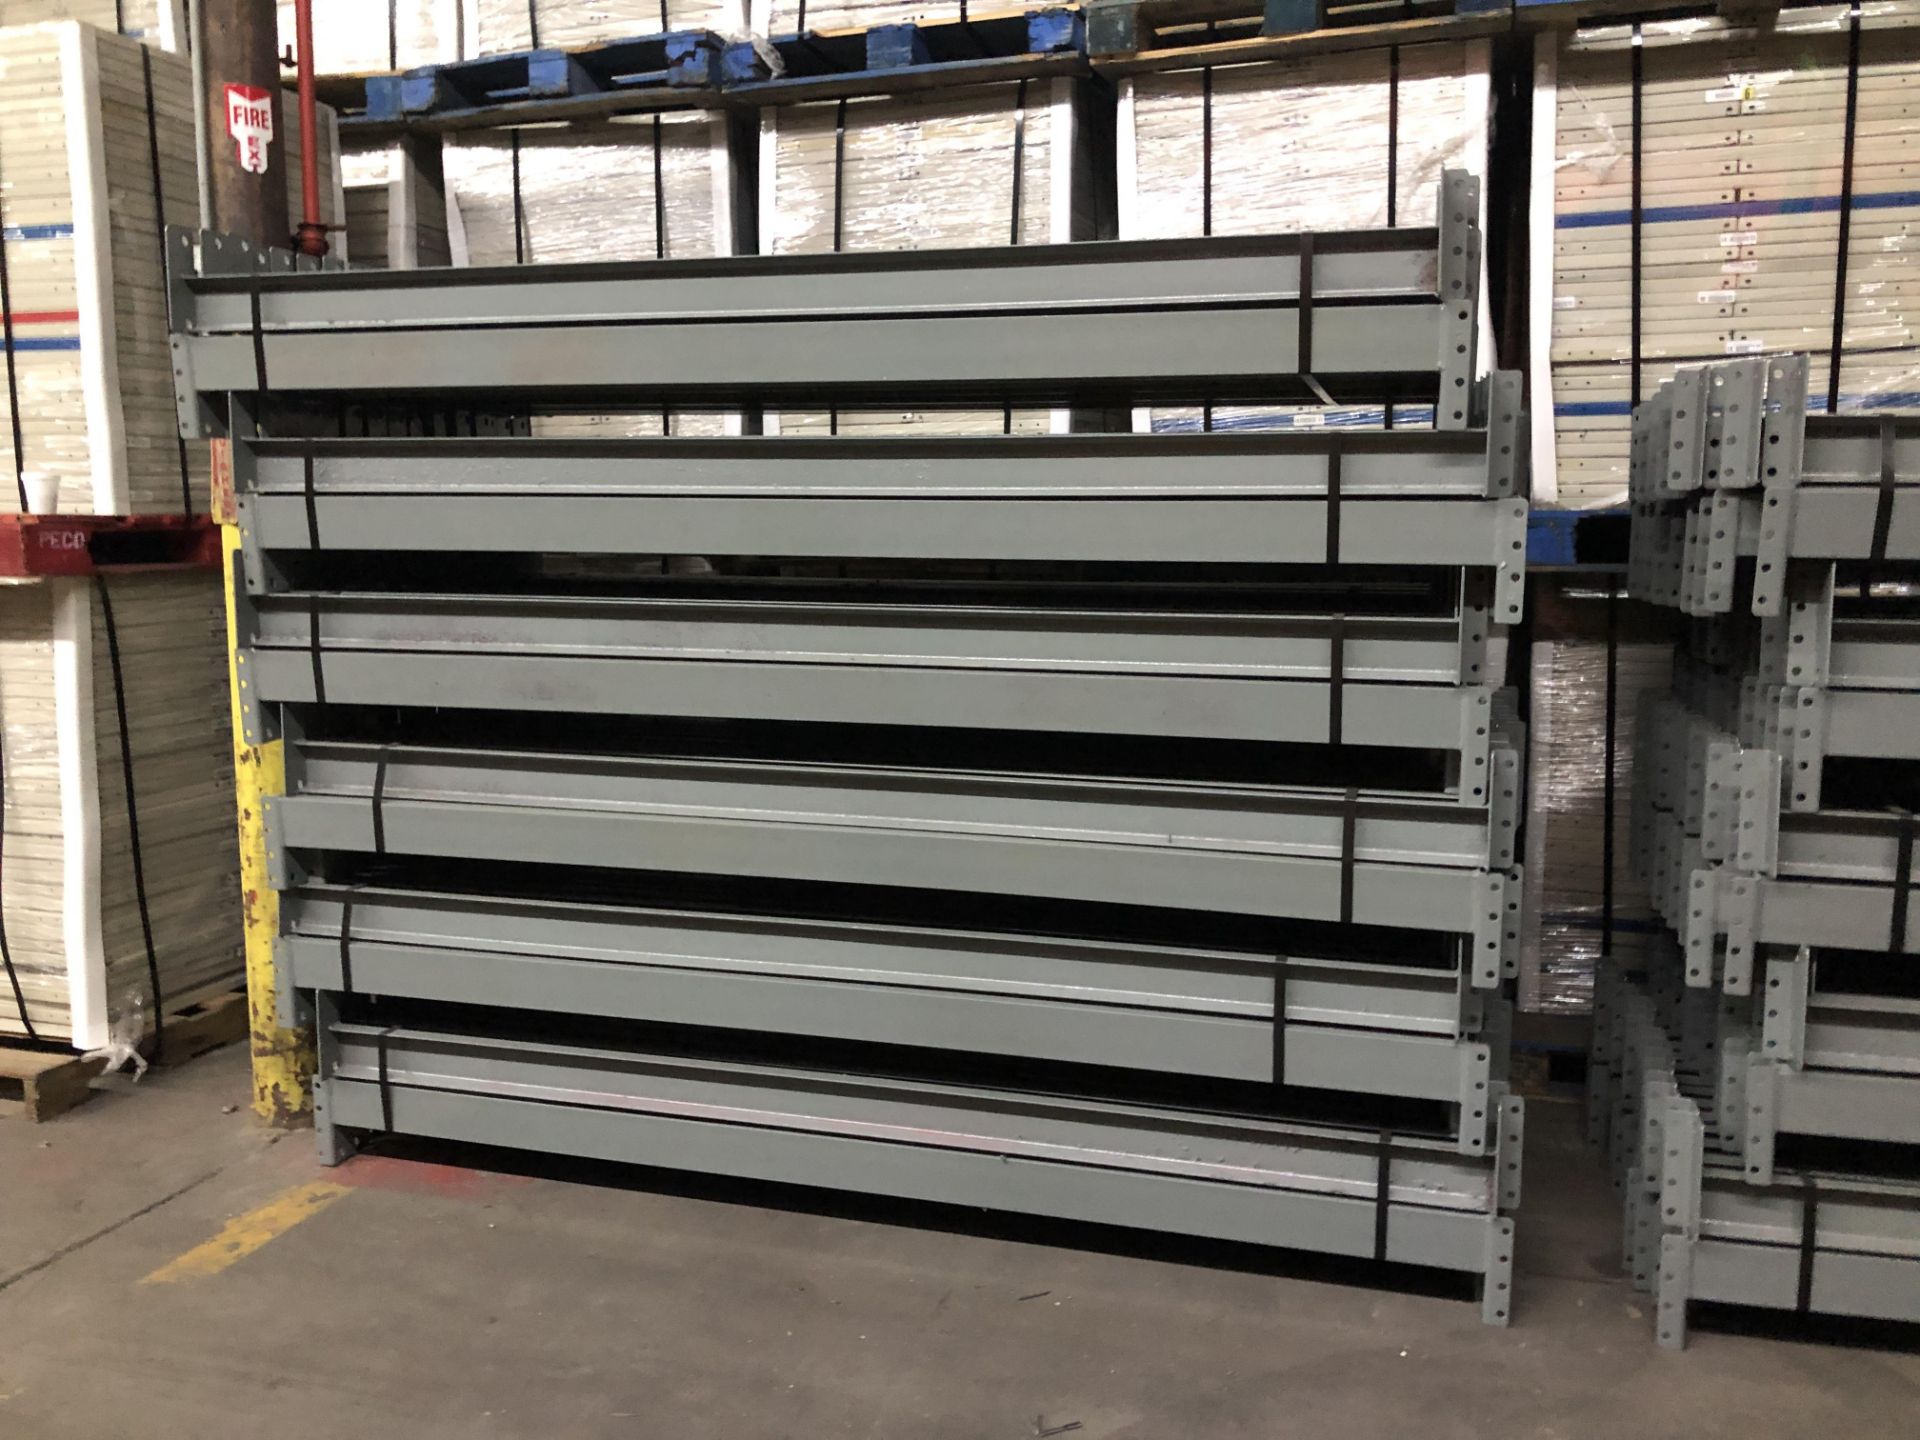 14 BAYS OF 10.5'H X 42"D X 93"L STRUCTURAL STYLE PALLET RACKS - Image 3 of 3